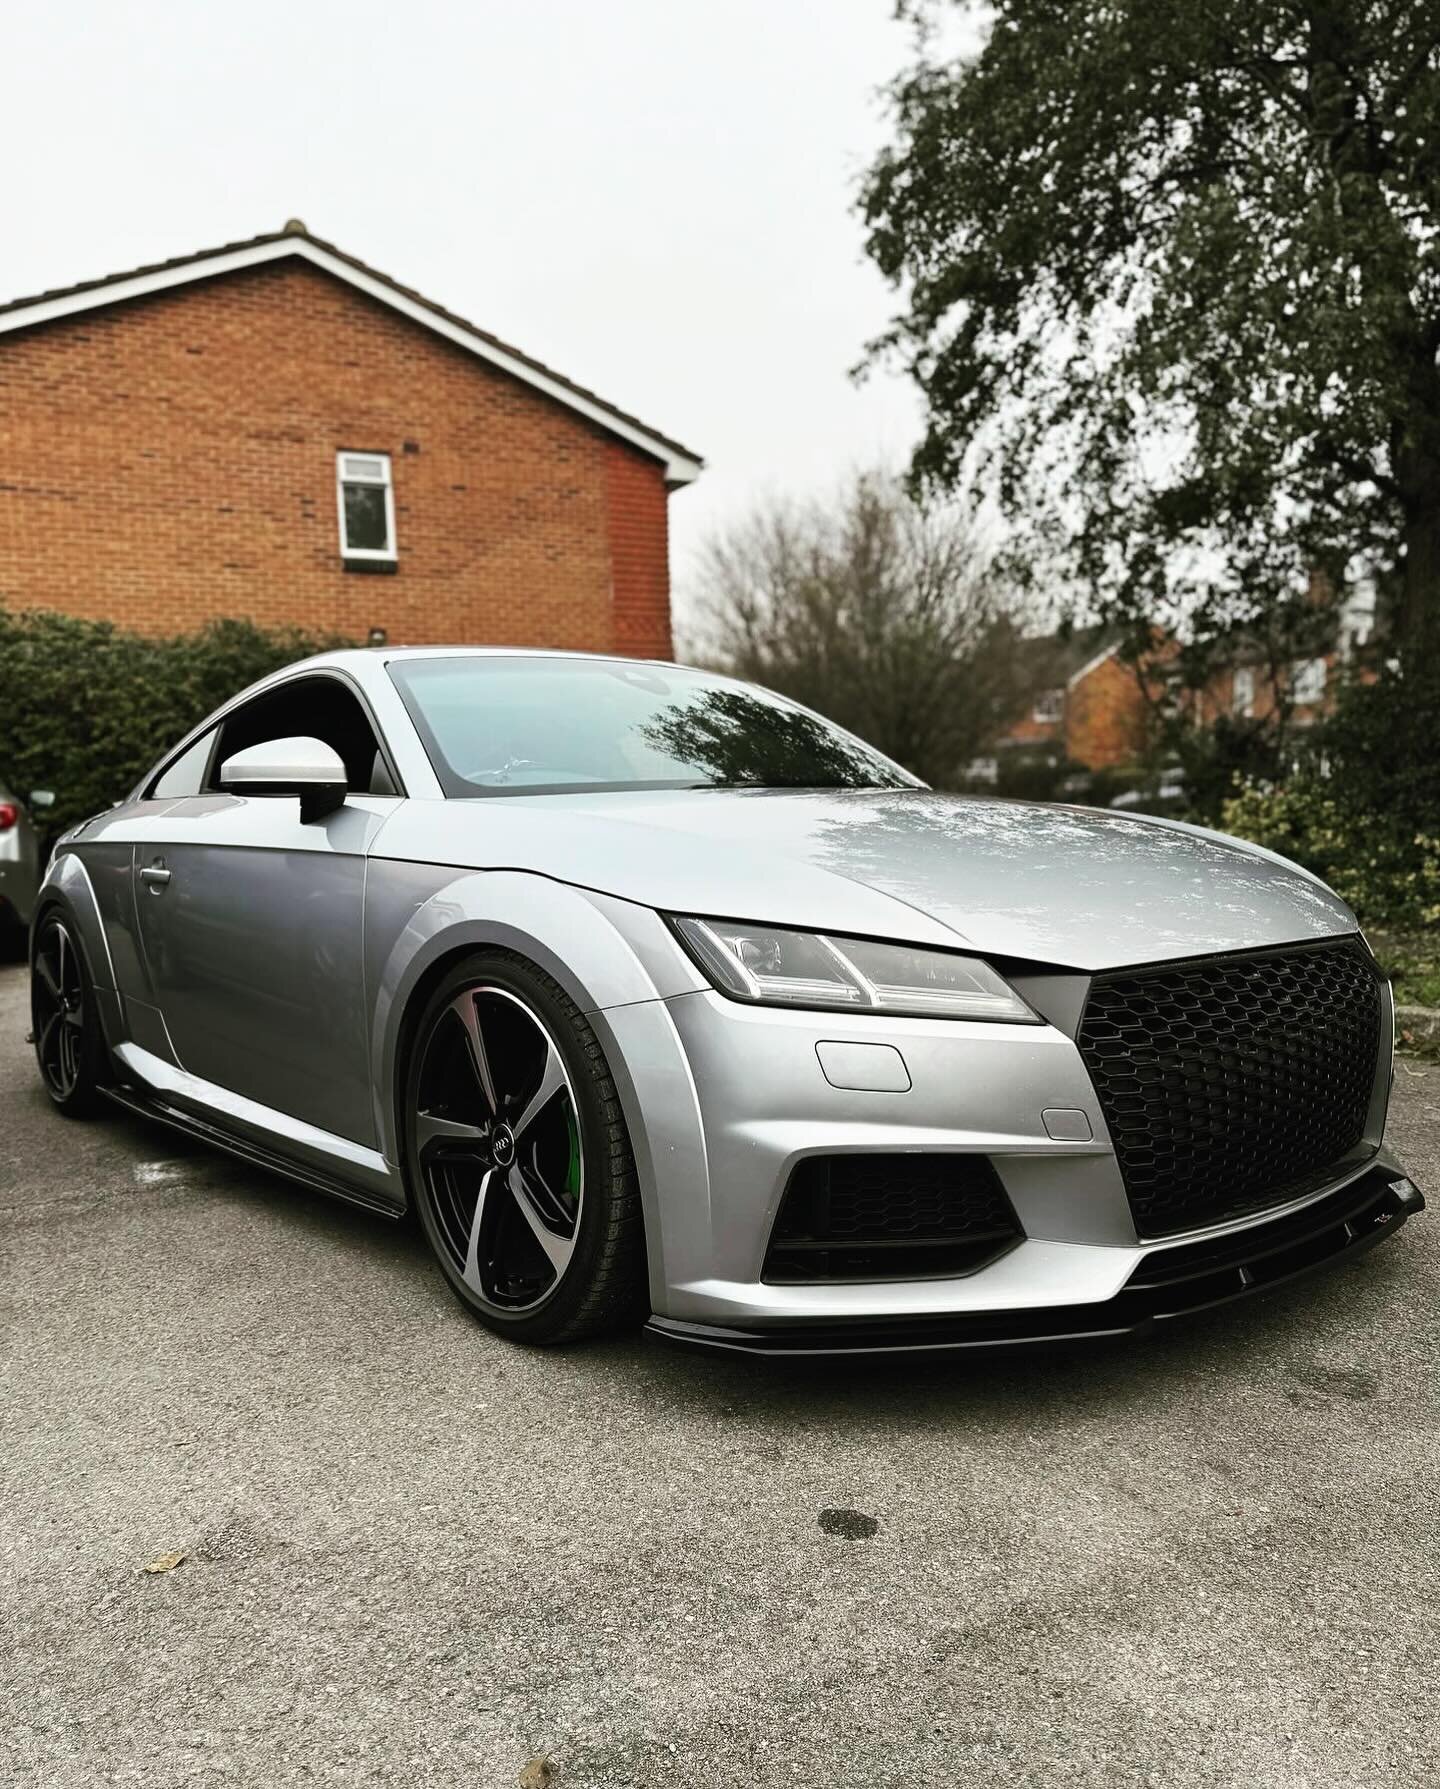 Audi TT (8S) 2.0 TFSI

Stage 1 Performance Remap
DSG Tune

Estimated Figures Before And After Stage 1
(Without Supporting Hardware Modifications):

📈 230 bhp ➡️ 300 bhp 📈
📈 370 nm ➡️ 440 nm 📈

Dyno Results Attached After Stage 1
(With Supporting 